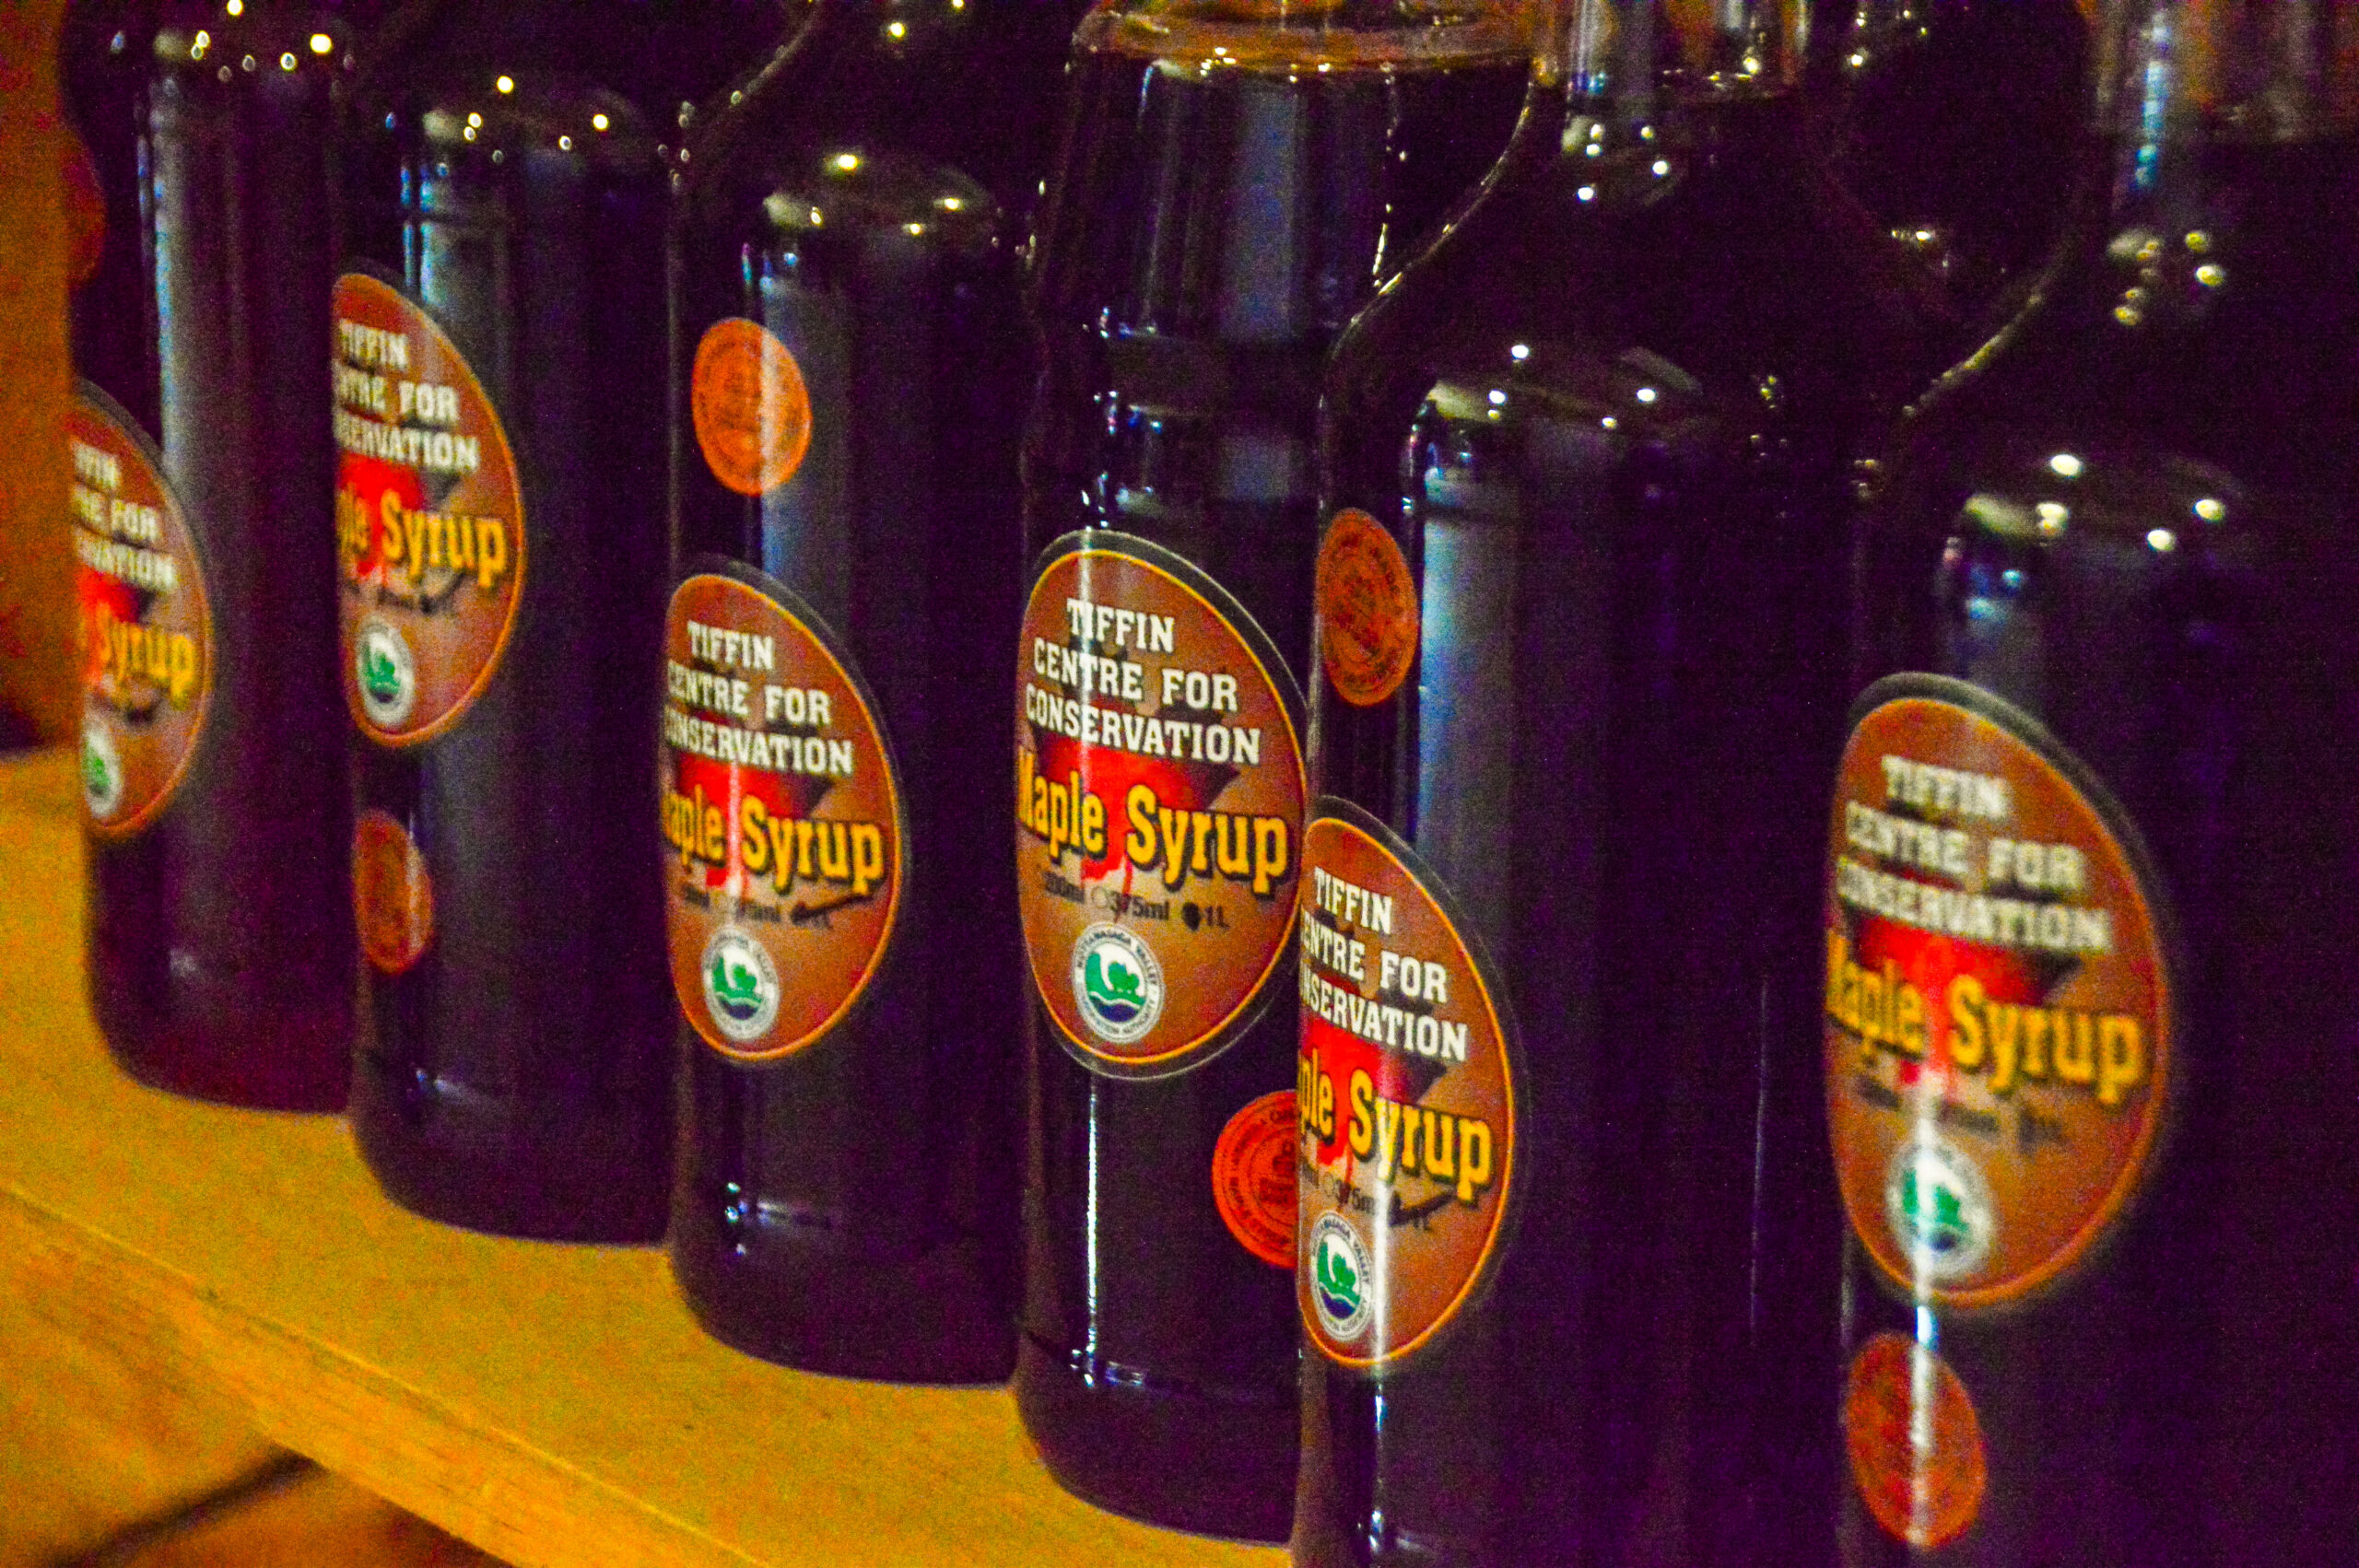 A close up image of Tiffin Maple Syrup bottles.